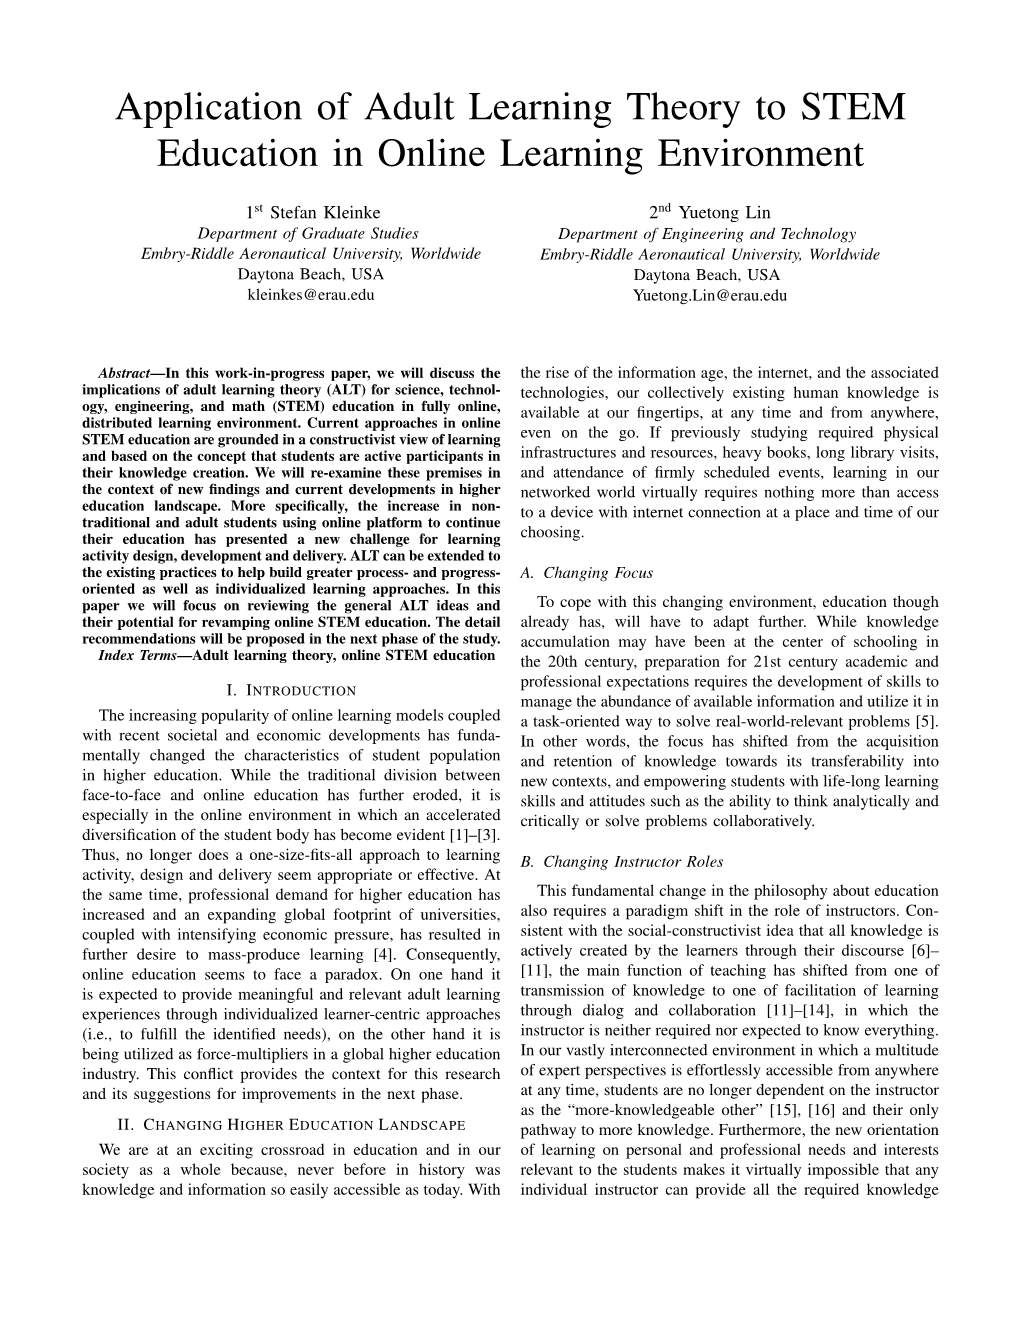 Application of Adult Learning Theory to STEM Education in Online Learning Environment